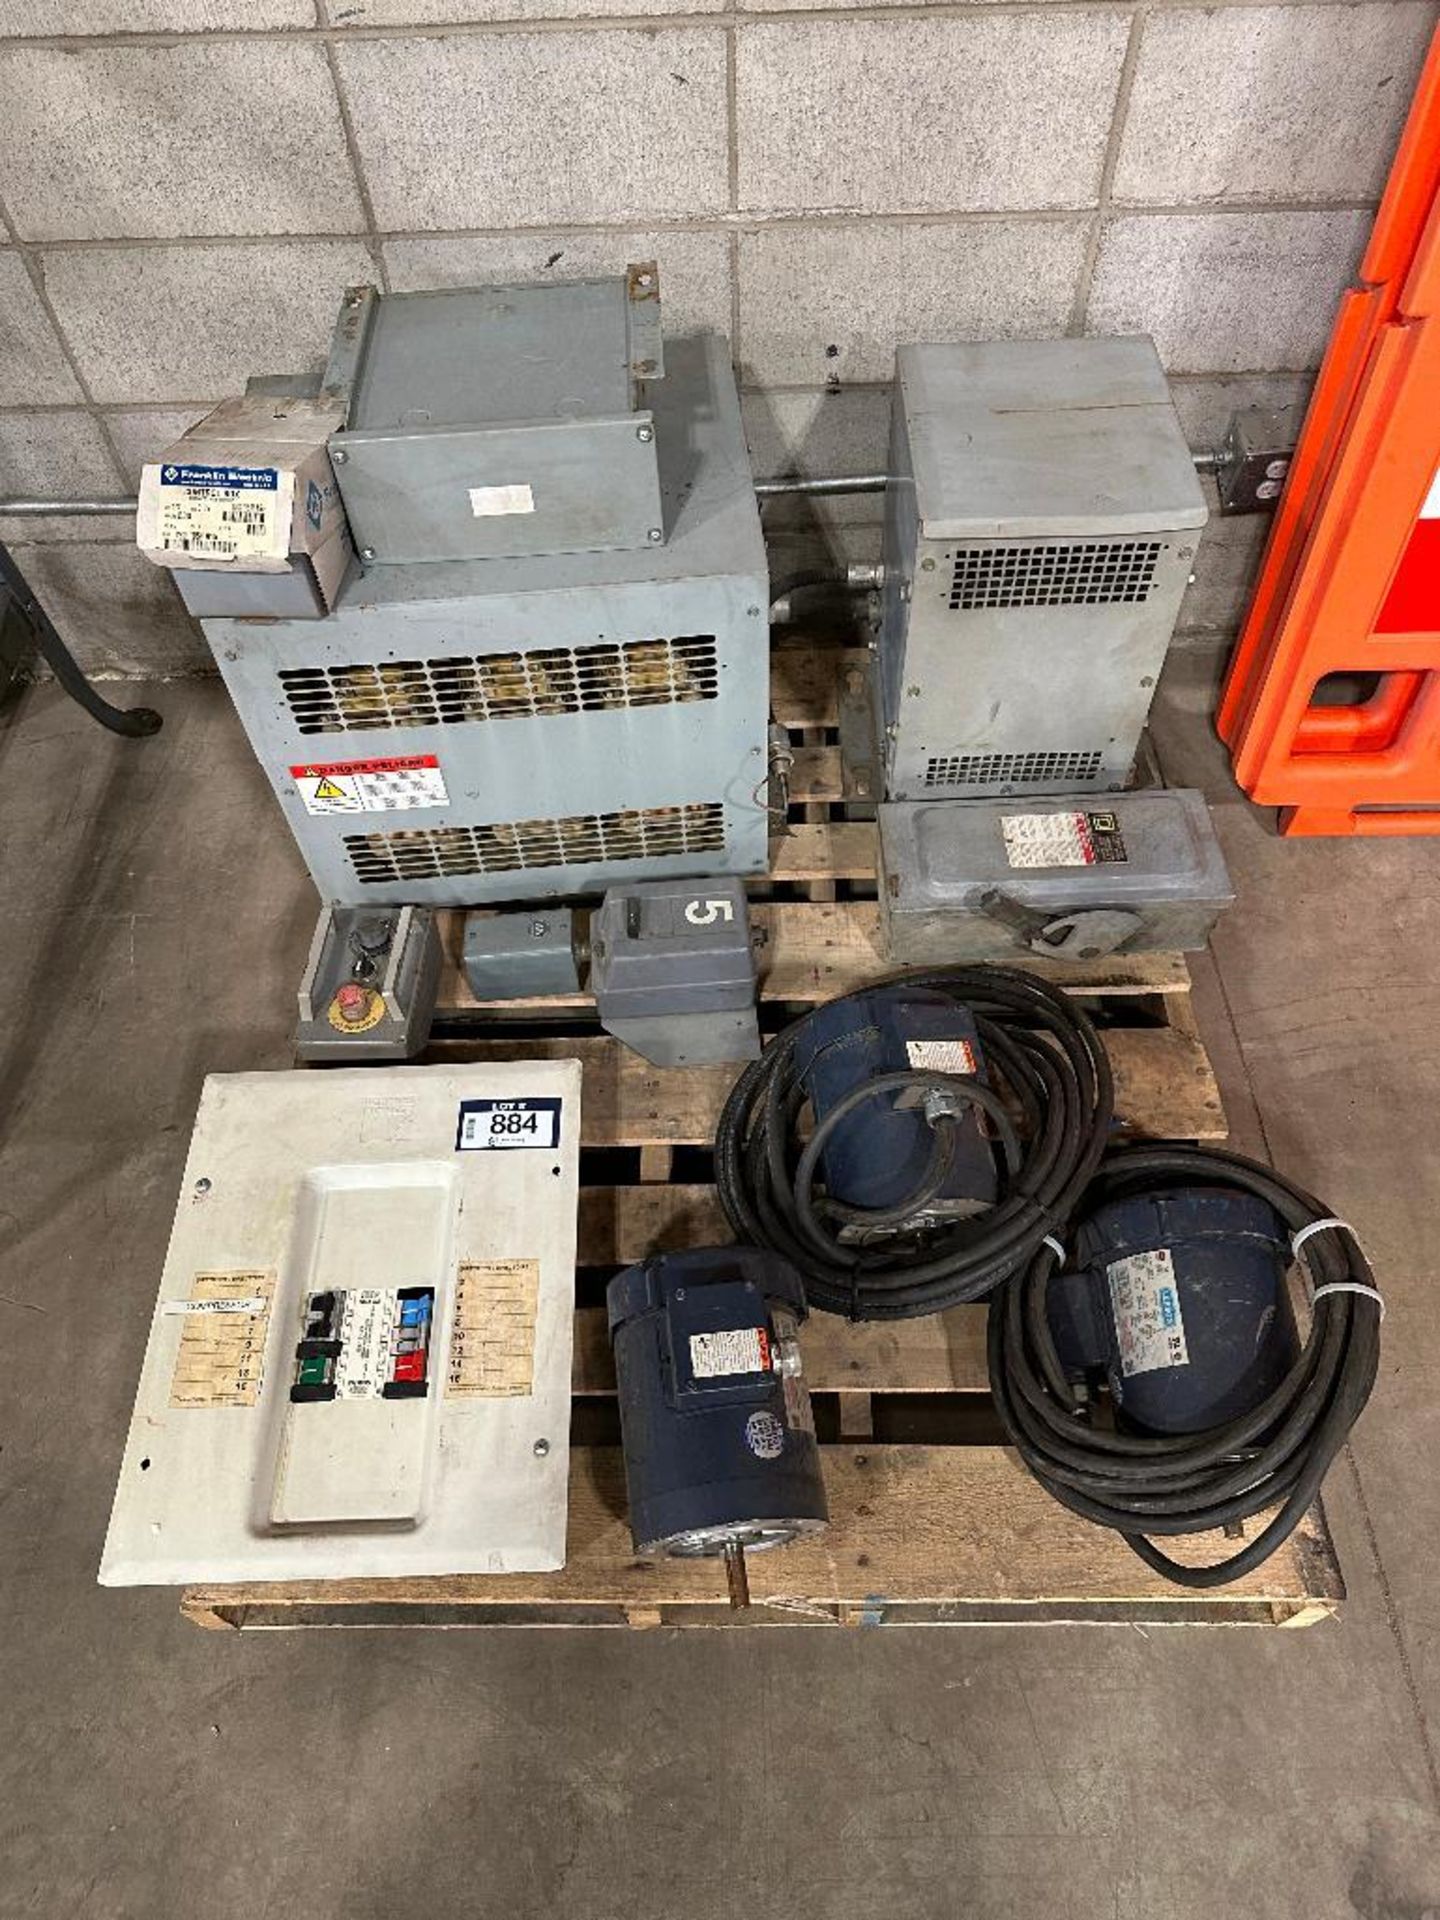 Pallet of Asst. Transformers, Electric Motors, Switches, Electrical Panel, etc.